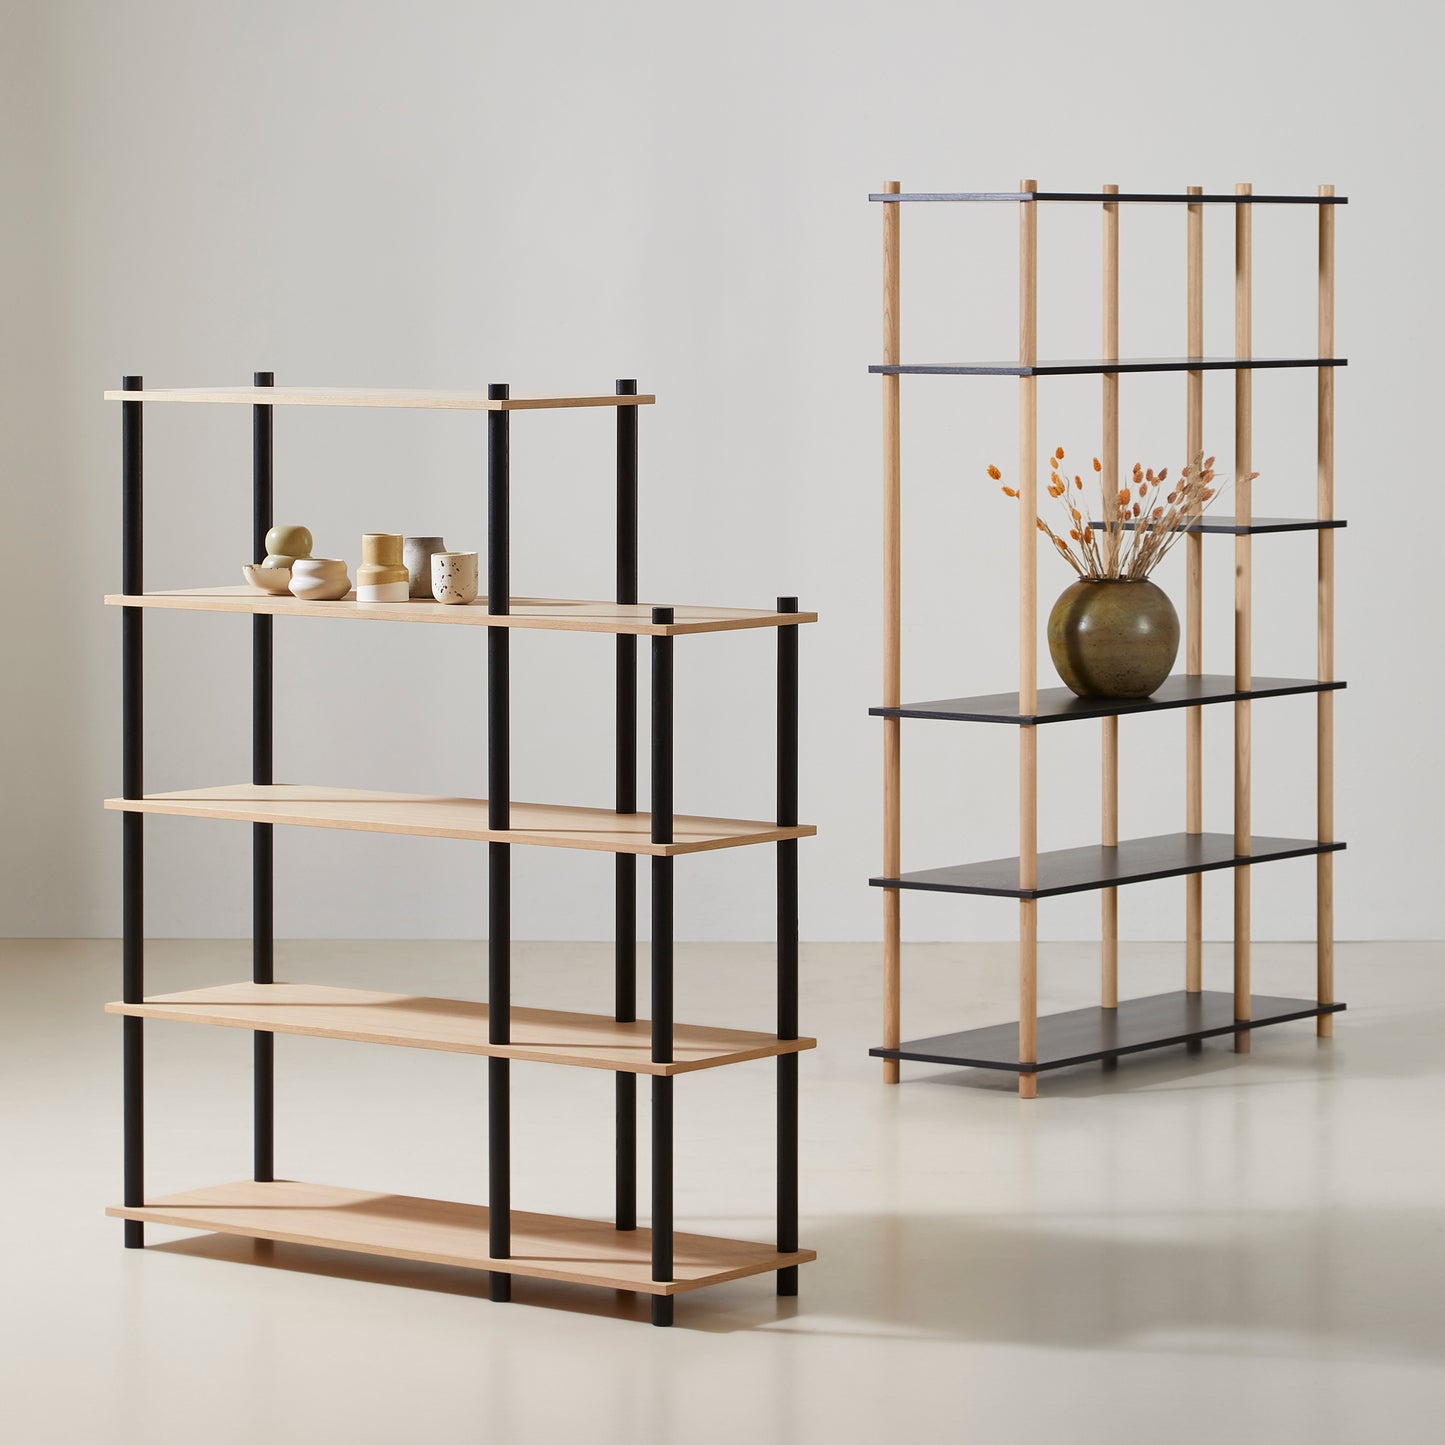 Elevate Shelving - System 8 by Woud